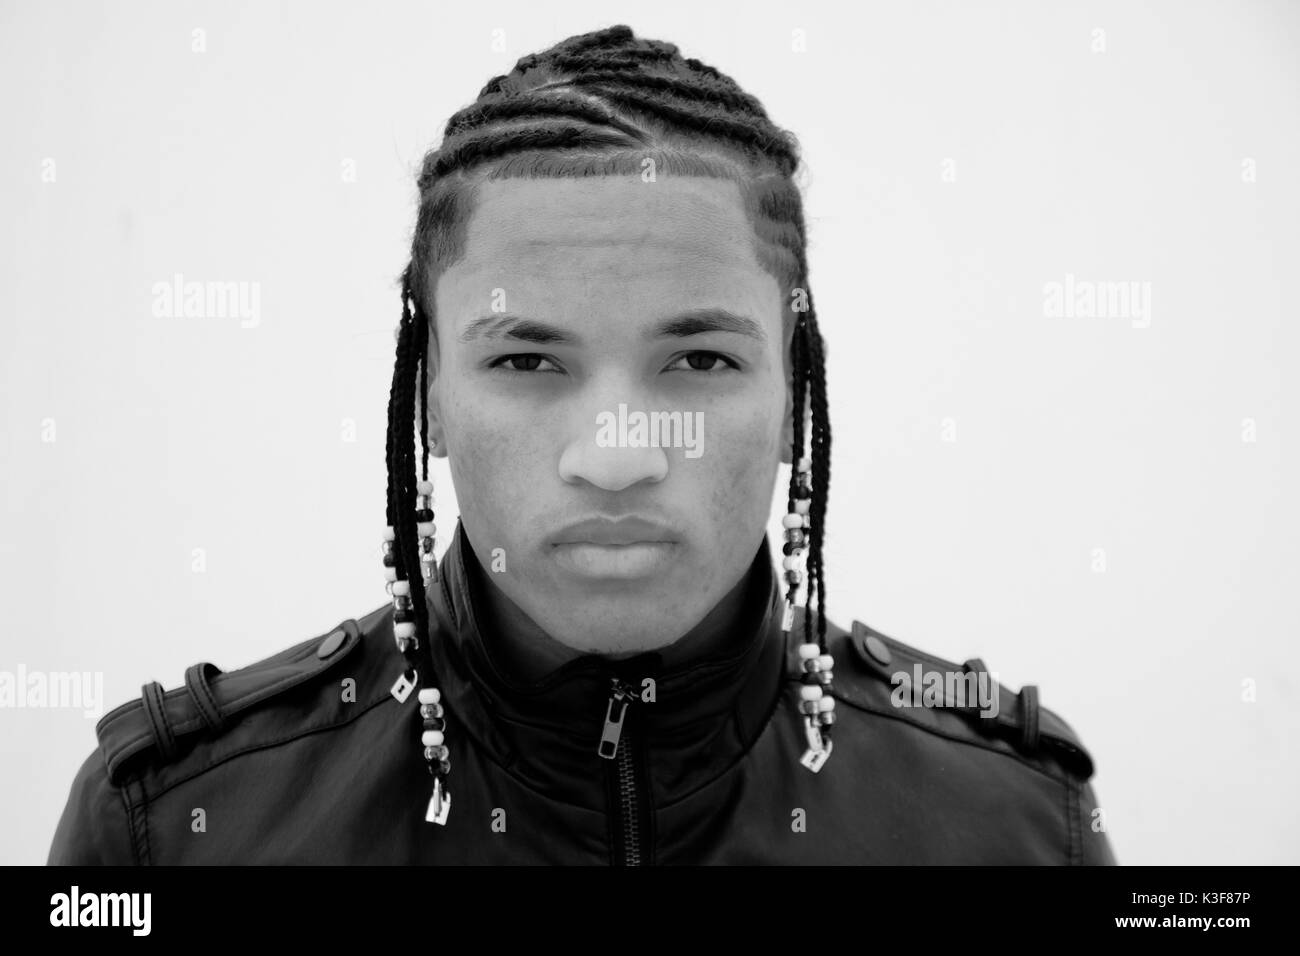 Portrait of Young Adult Man with Braided Hair Stock Photo